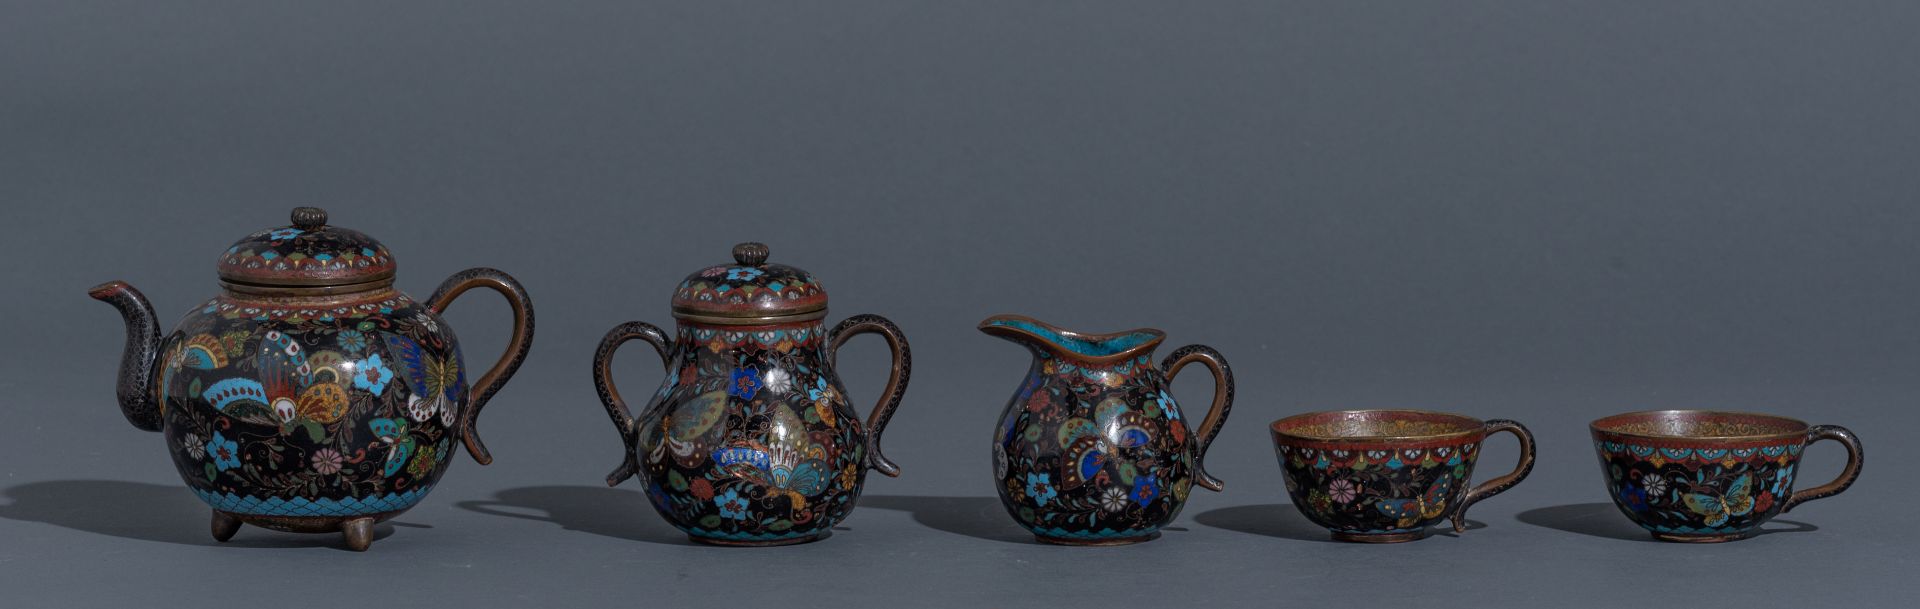 A Japanese cloisonné enamel tea set, i.e. a tray, two cups and saucers, a teapot and cover, a milk j - Image 4 of 9